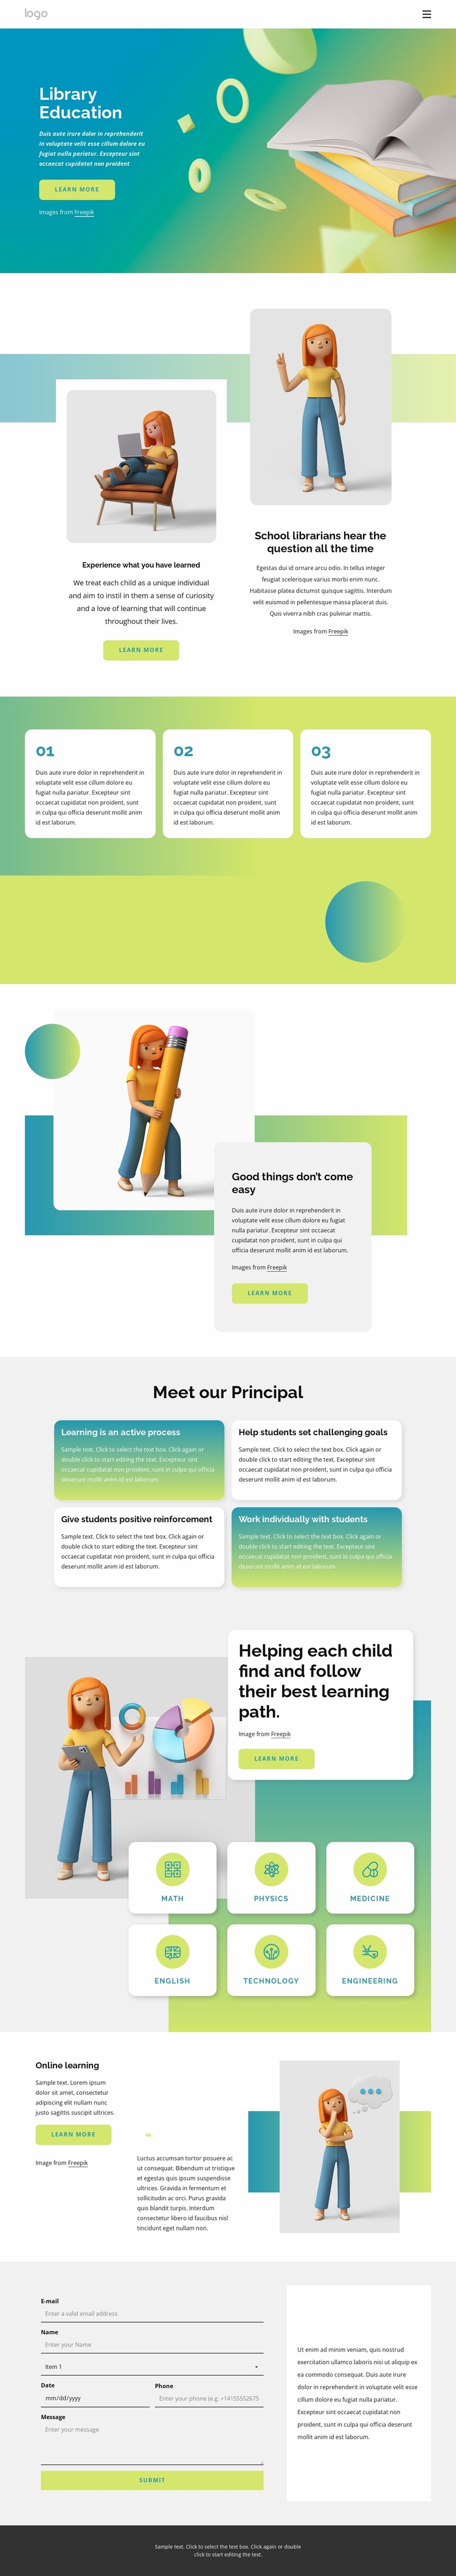 Education library Website Template